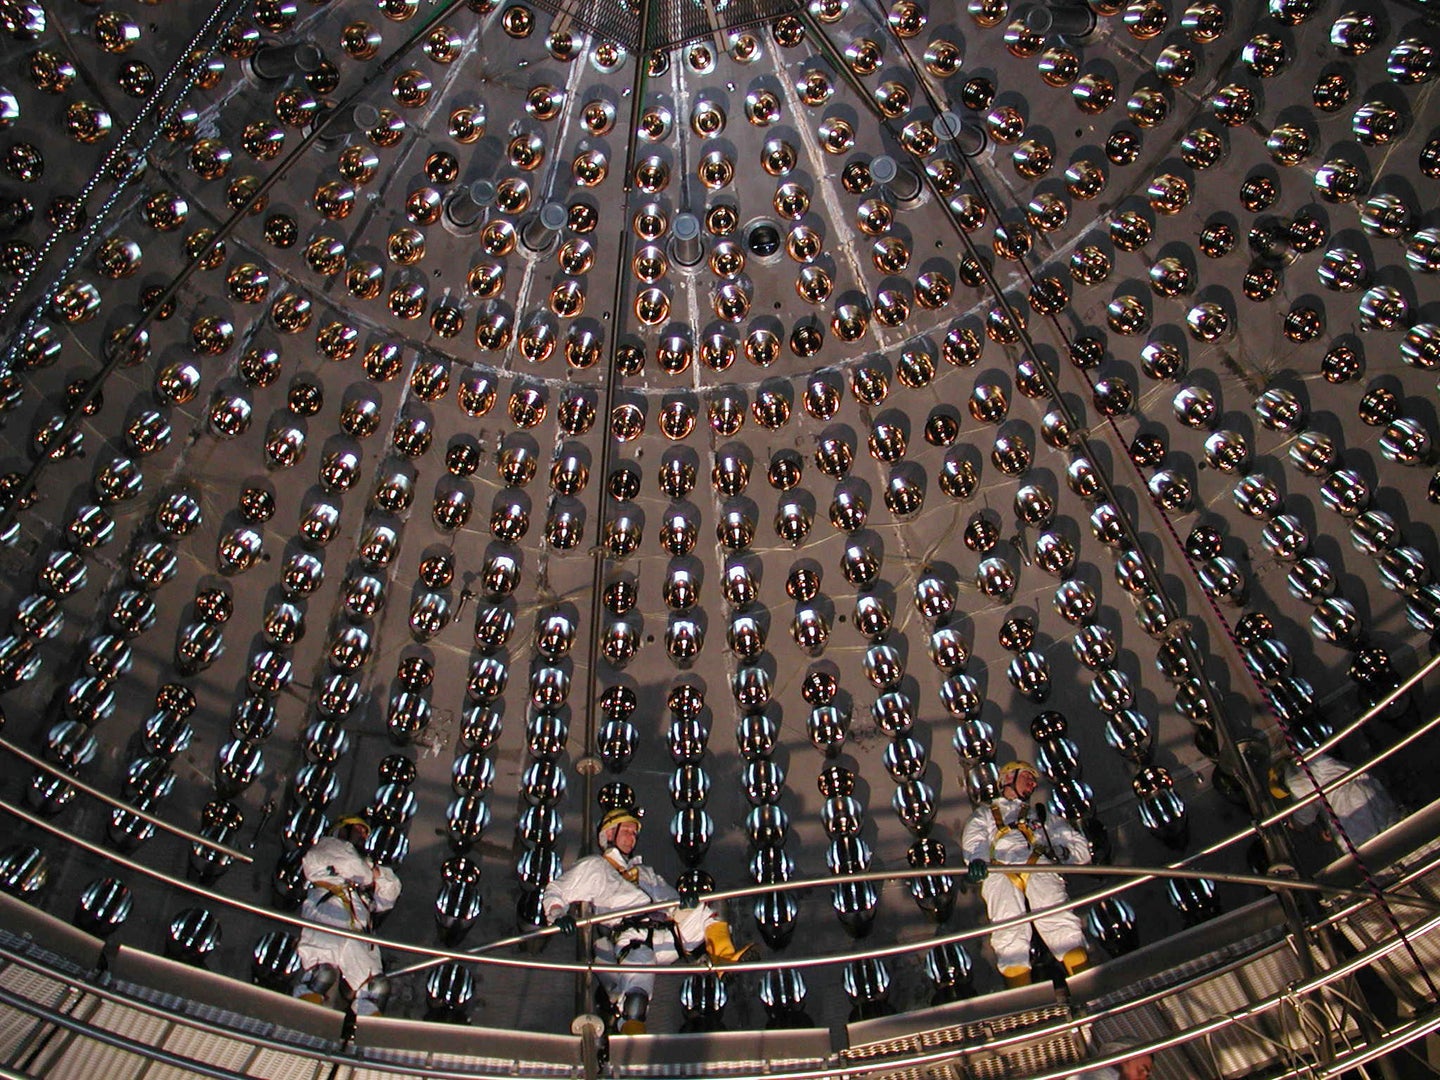 Princeton University scientists and others in the Borexino Collaboration have detected geoneutrinos at the Gran Sasso National Laboratory of the Italian Institute of Nuclear Physics. The discovery could explain how reactions taking place in the planet's deep interior affect events on the surface.